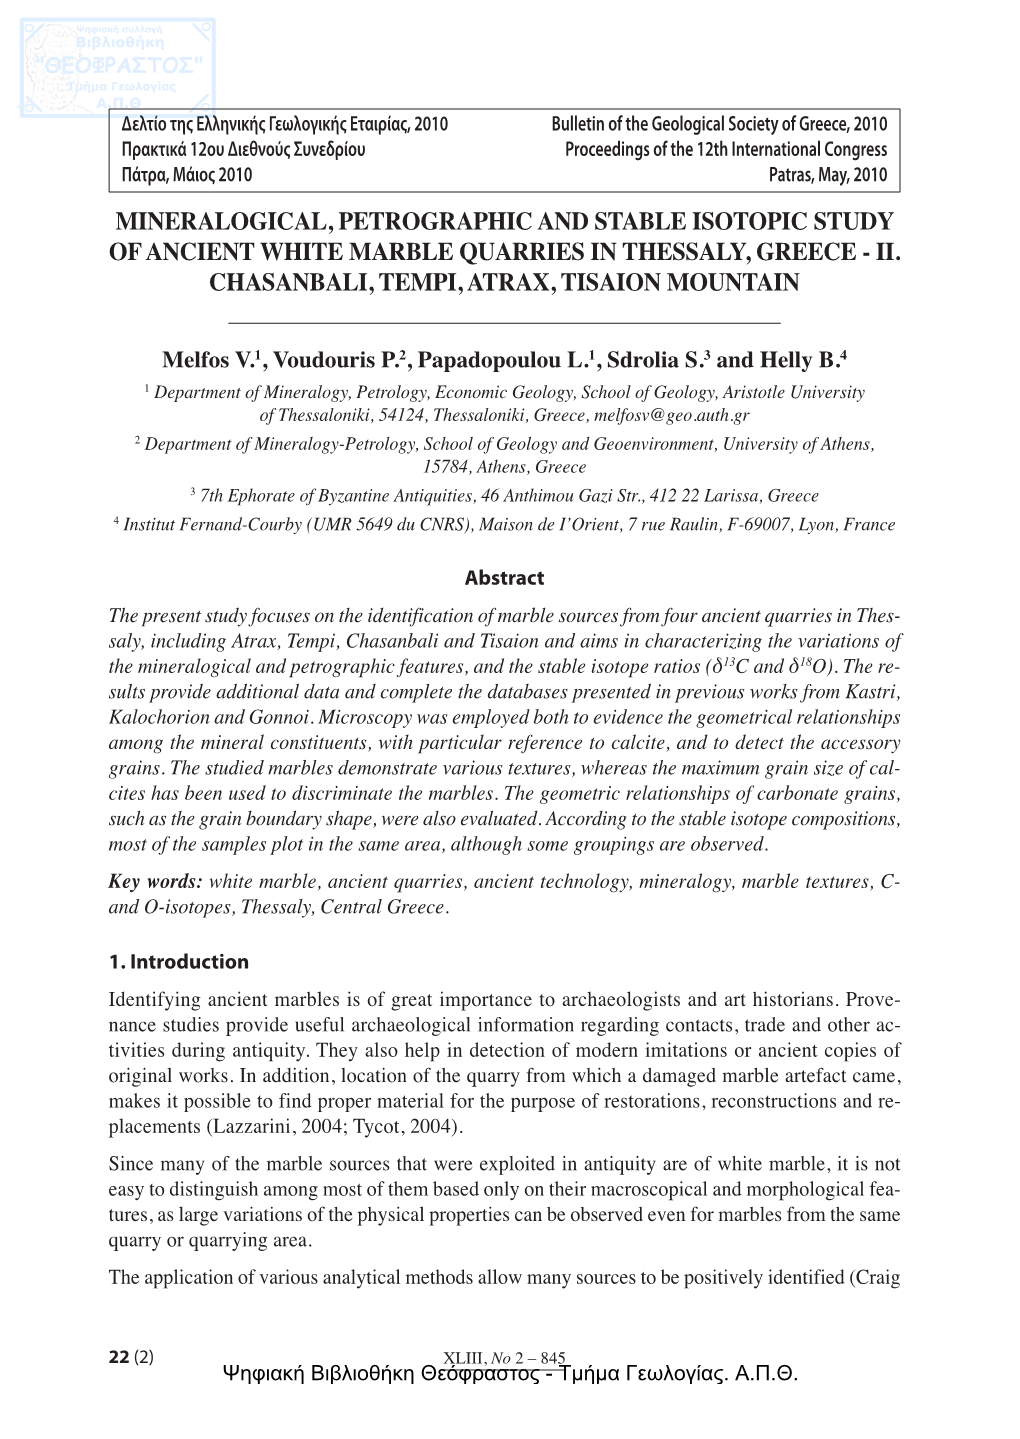 Mineralogical, Petrographic and Stable Isotopic Study of Ancient White Marble Quarries in Thessaly, Greece - Ii